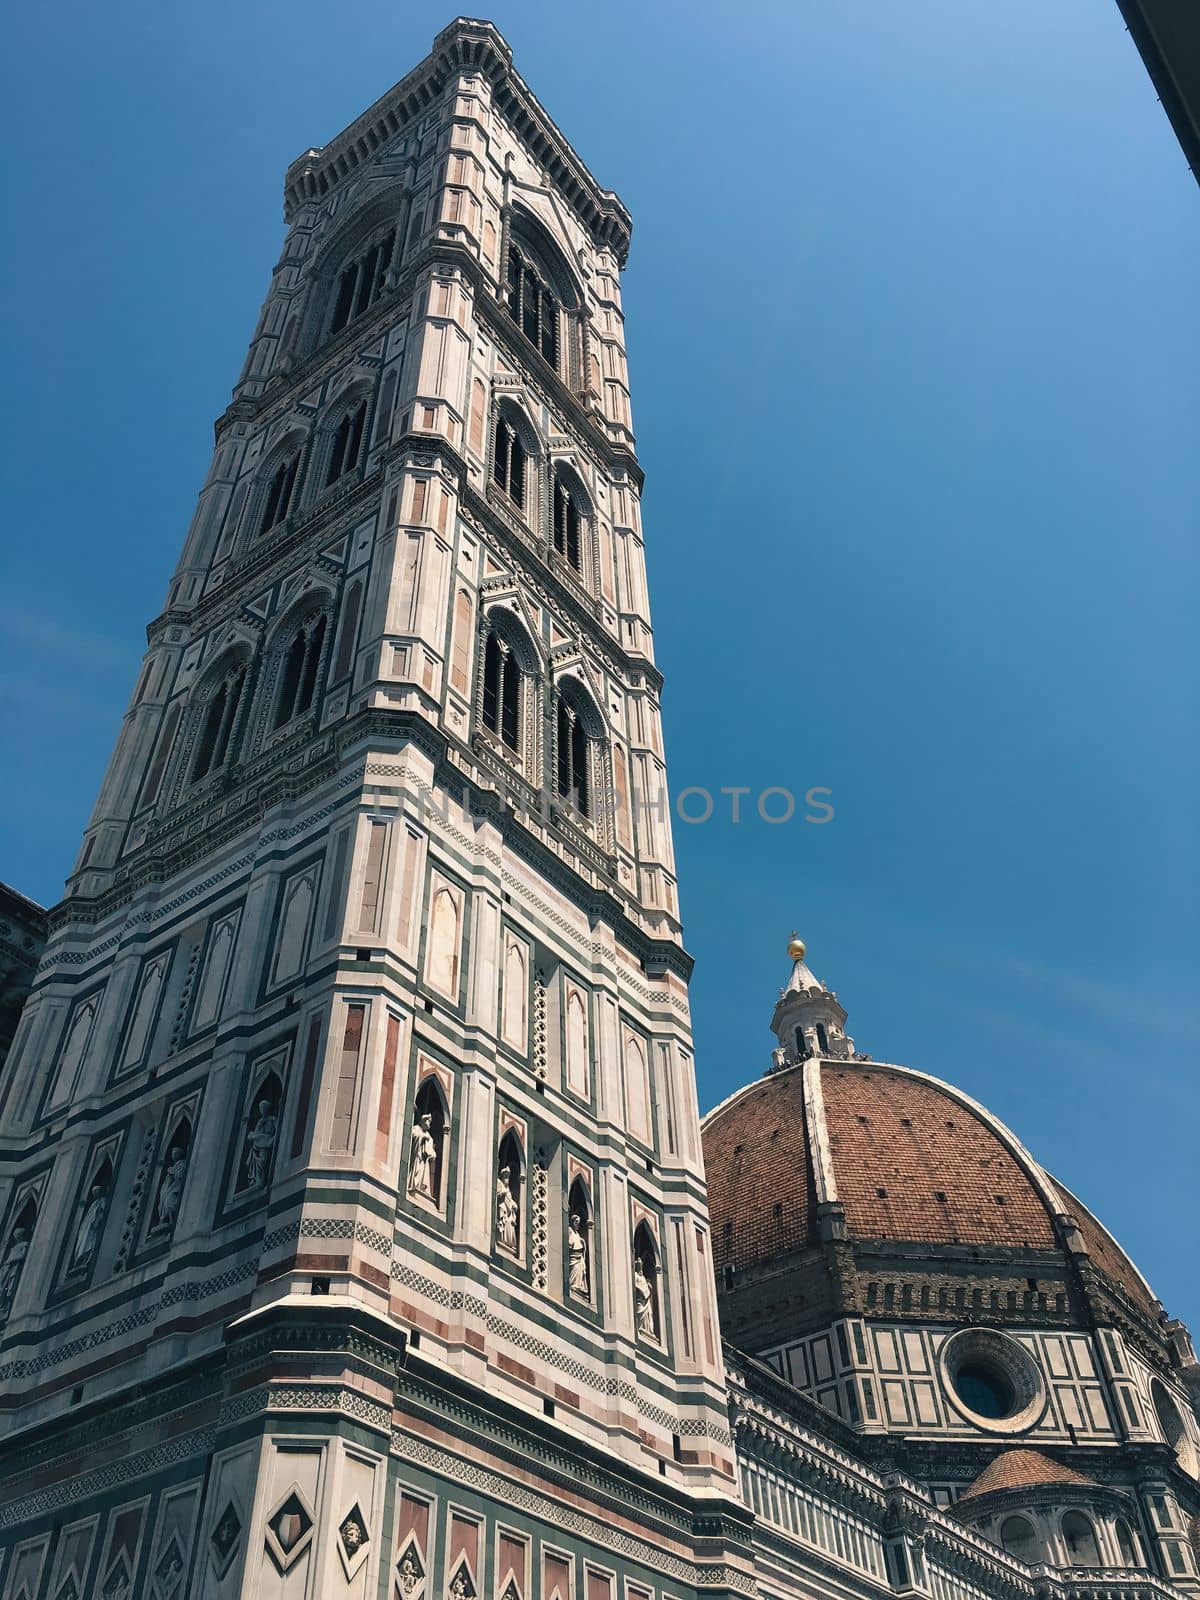 Florence city hall in the middle of town in summer time with people out enjoying the view by WeWander